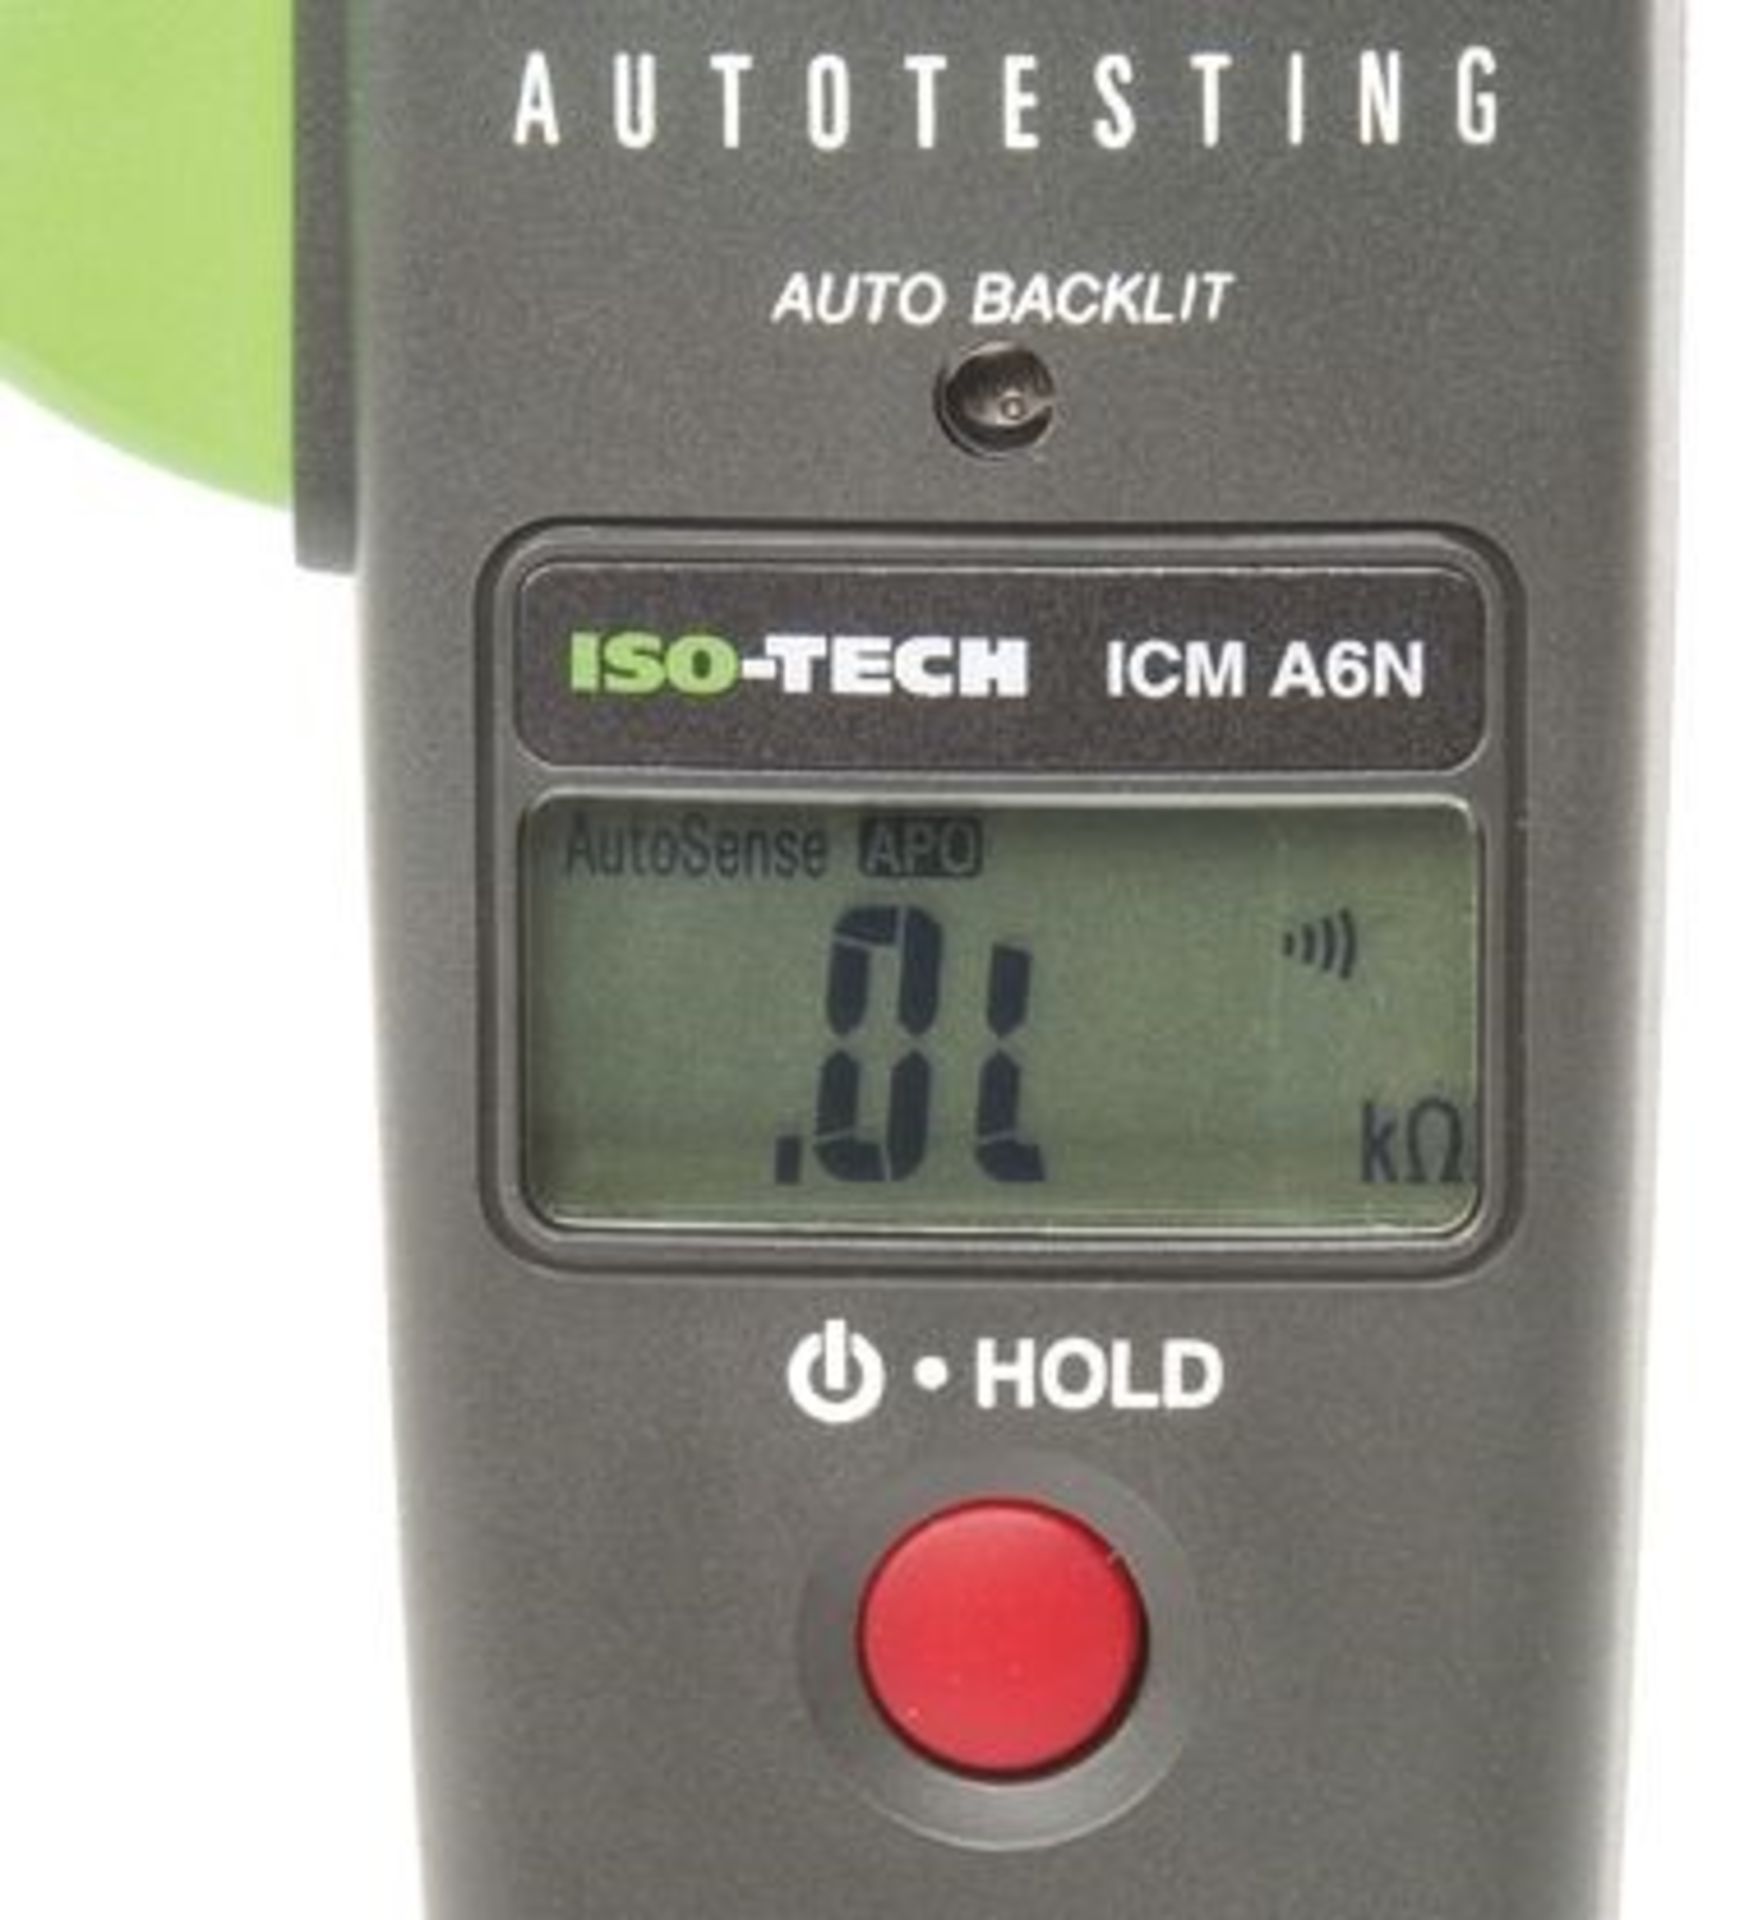 16 x ISO-TECH ICMA6 Clamp Meter, Max Current 600A ac CAT II 1000 V CAT III 600 V - Image 3 of 3